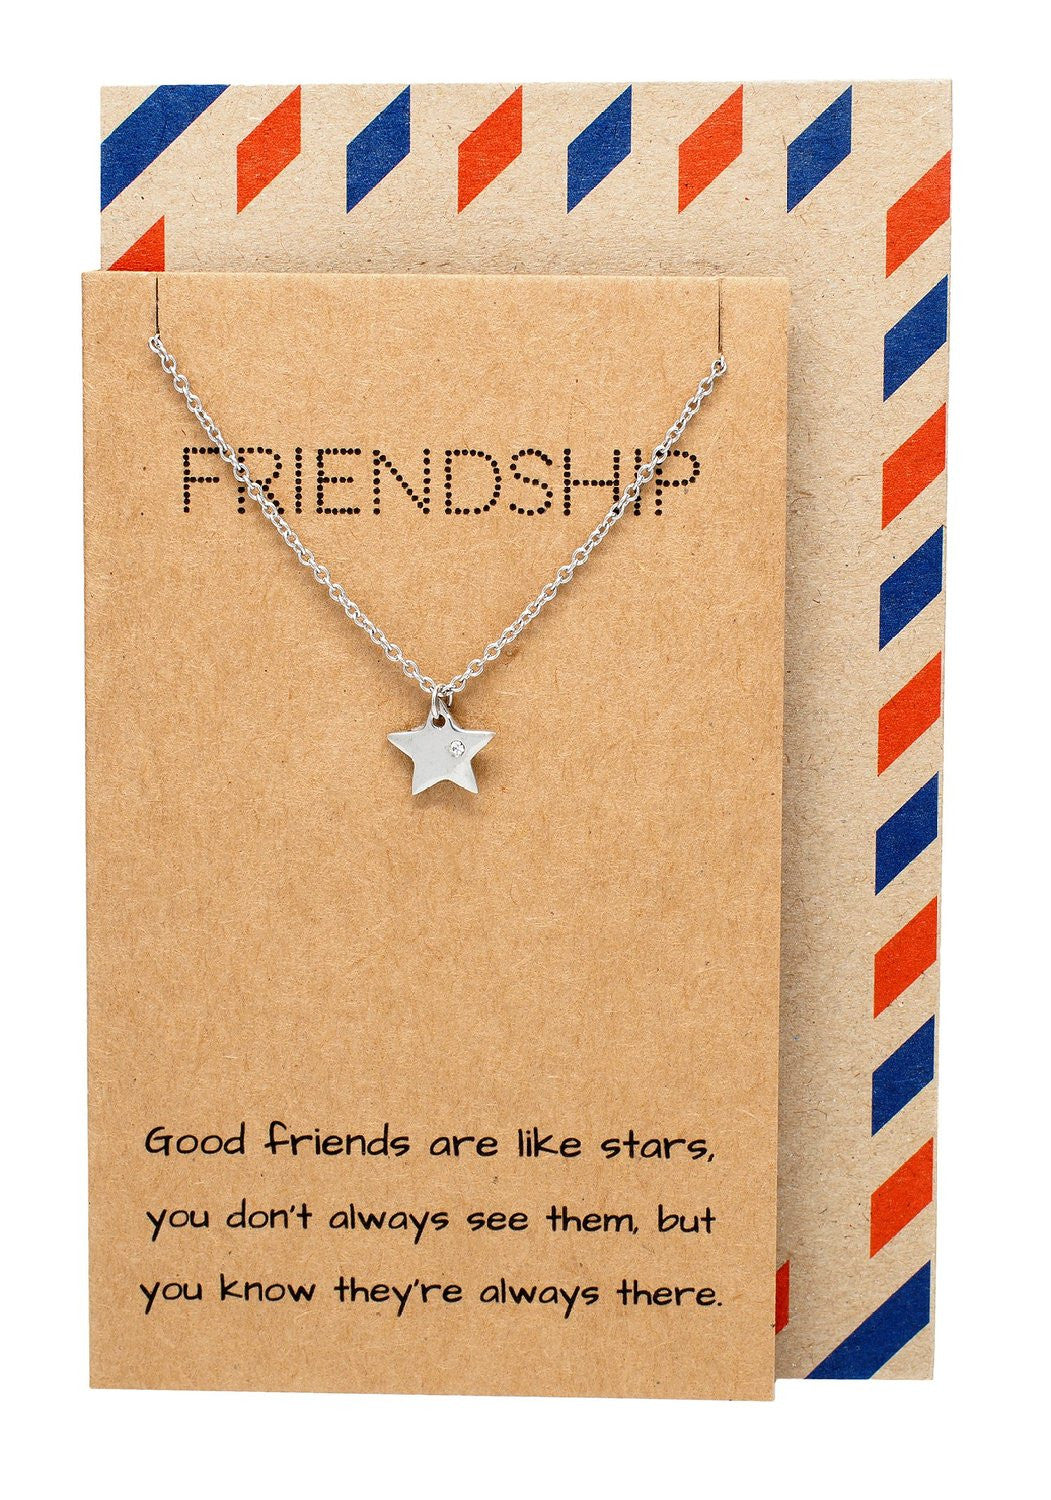 Ria Best Friend Necklaces with Star Pendant and Friendship Quote